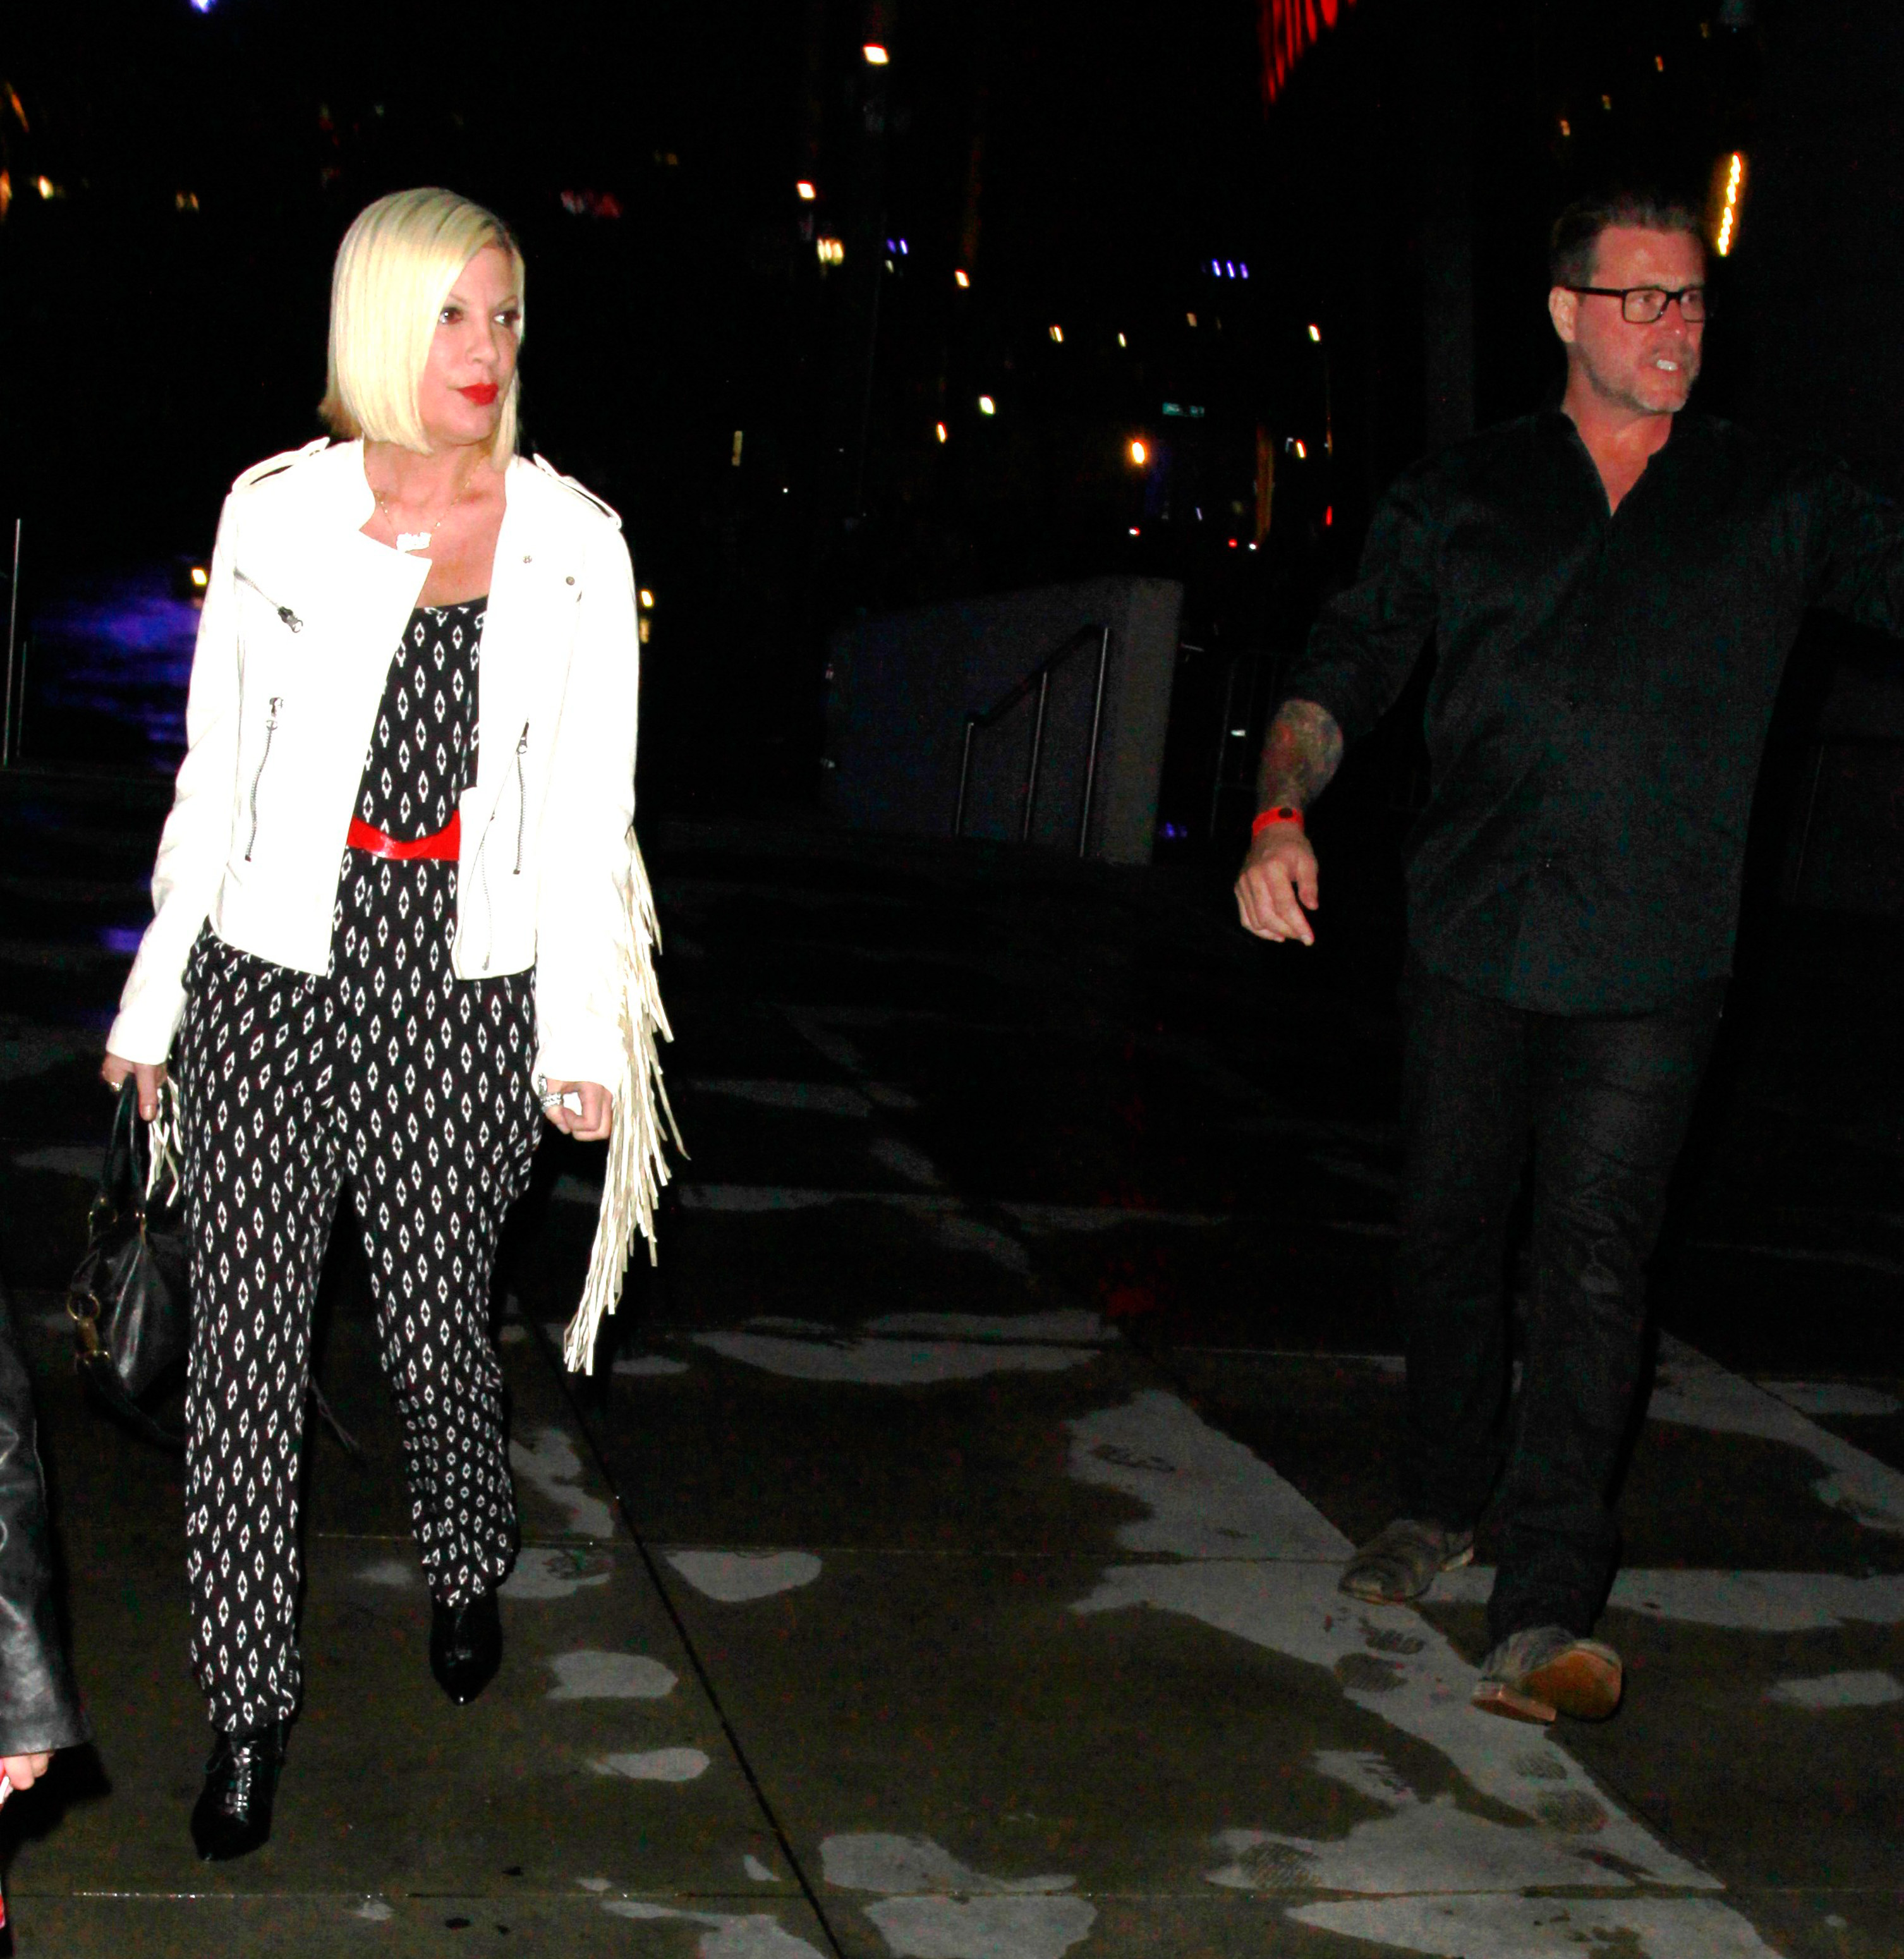 Tori Spelling and Dean McDermott spotted in Los Angeles, California on February 28, 2015 | Source: Getty Images